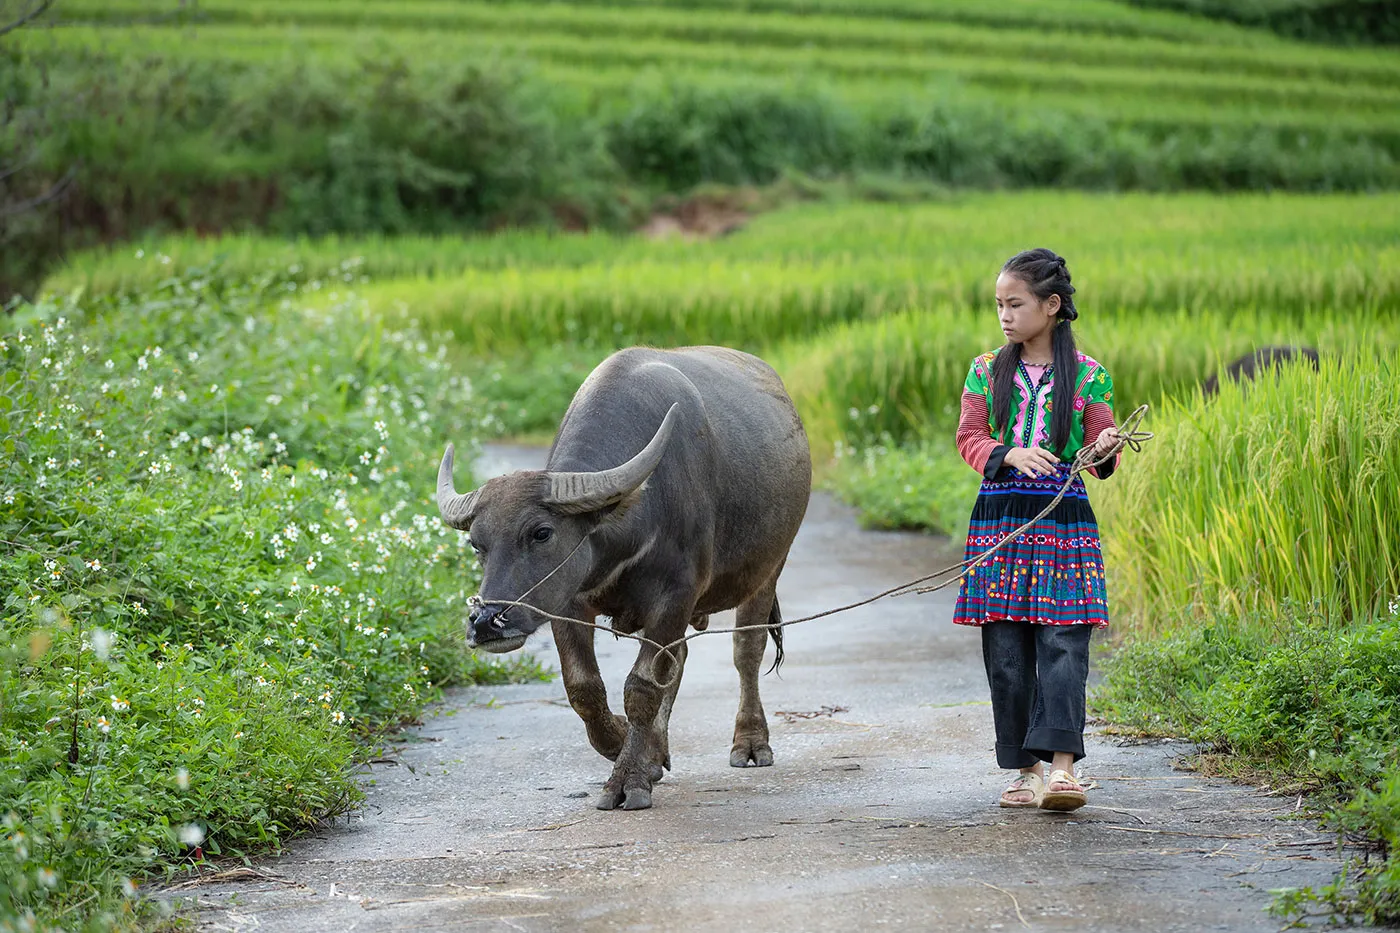 A young Cambodian girl walks with a cow.